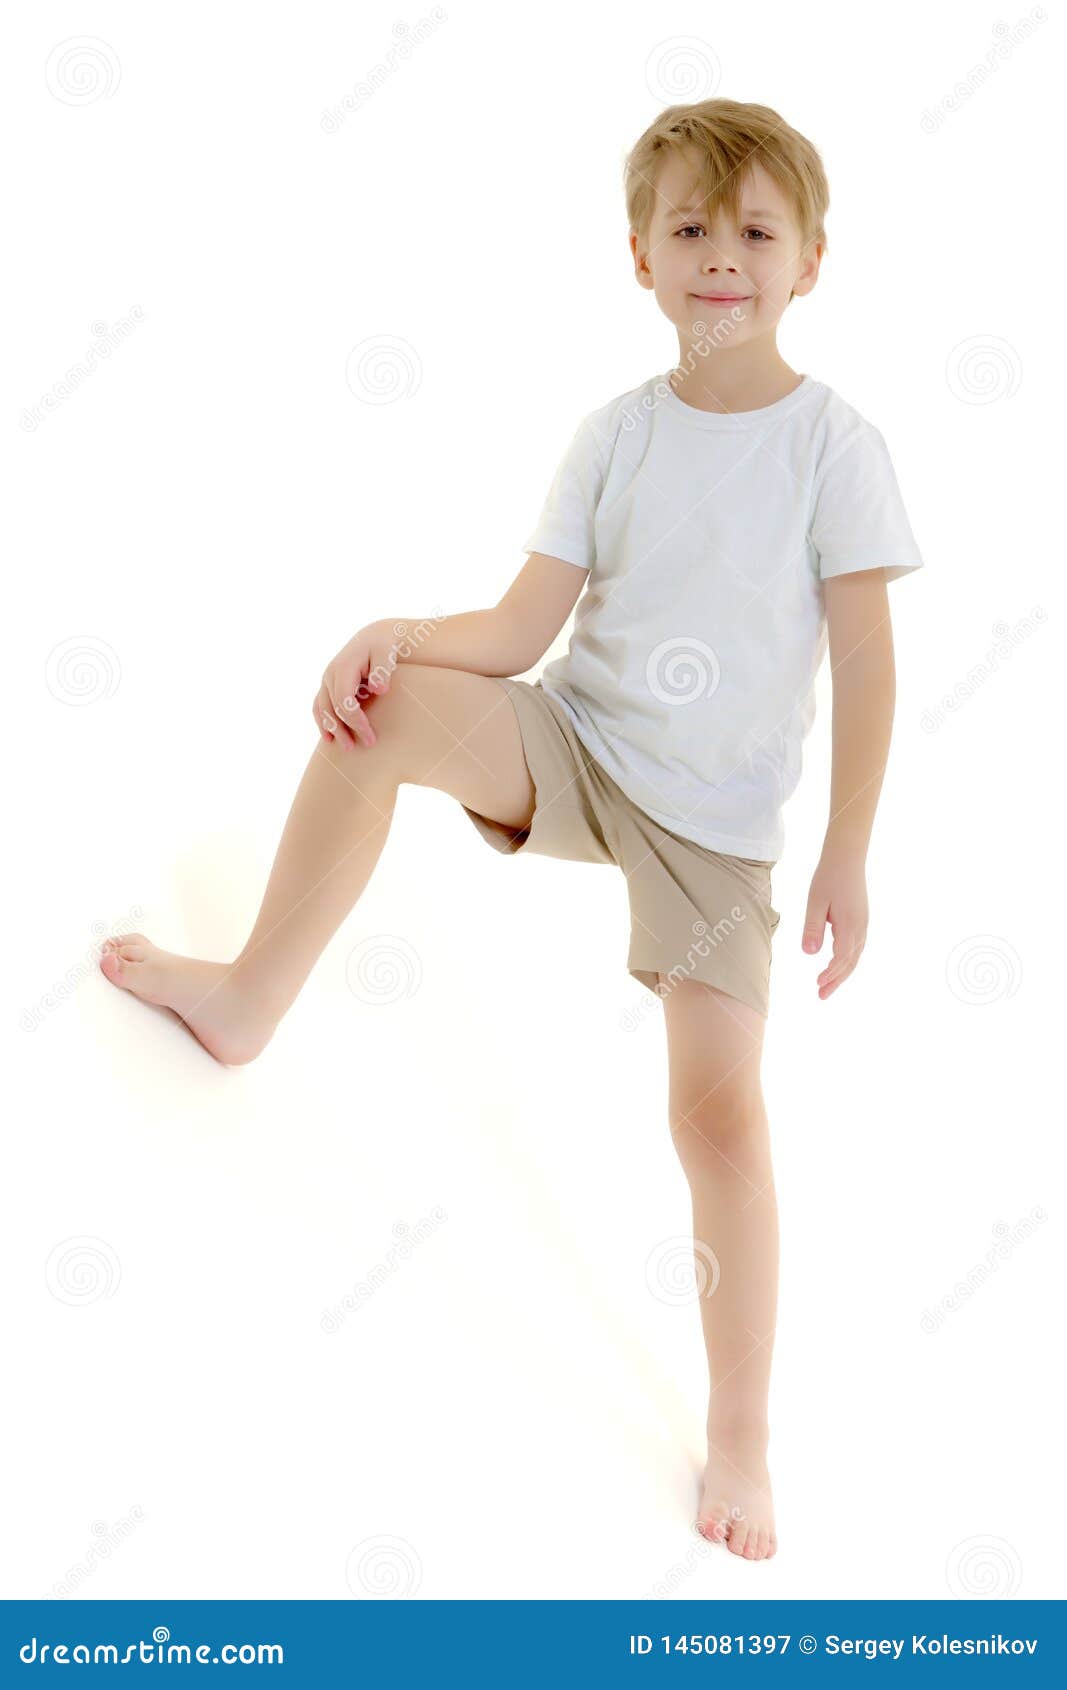 Emotional Little Boy in a Pure White T-shirt. Stock Image - Image of ...